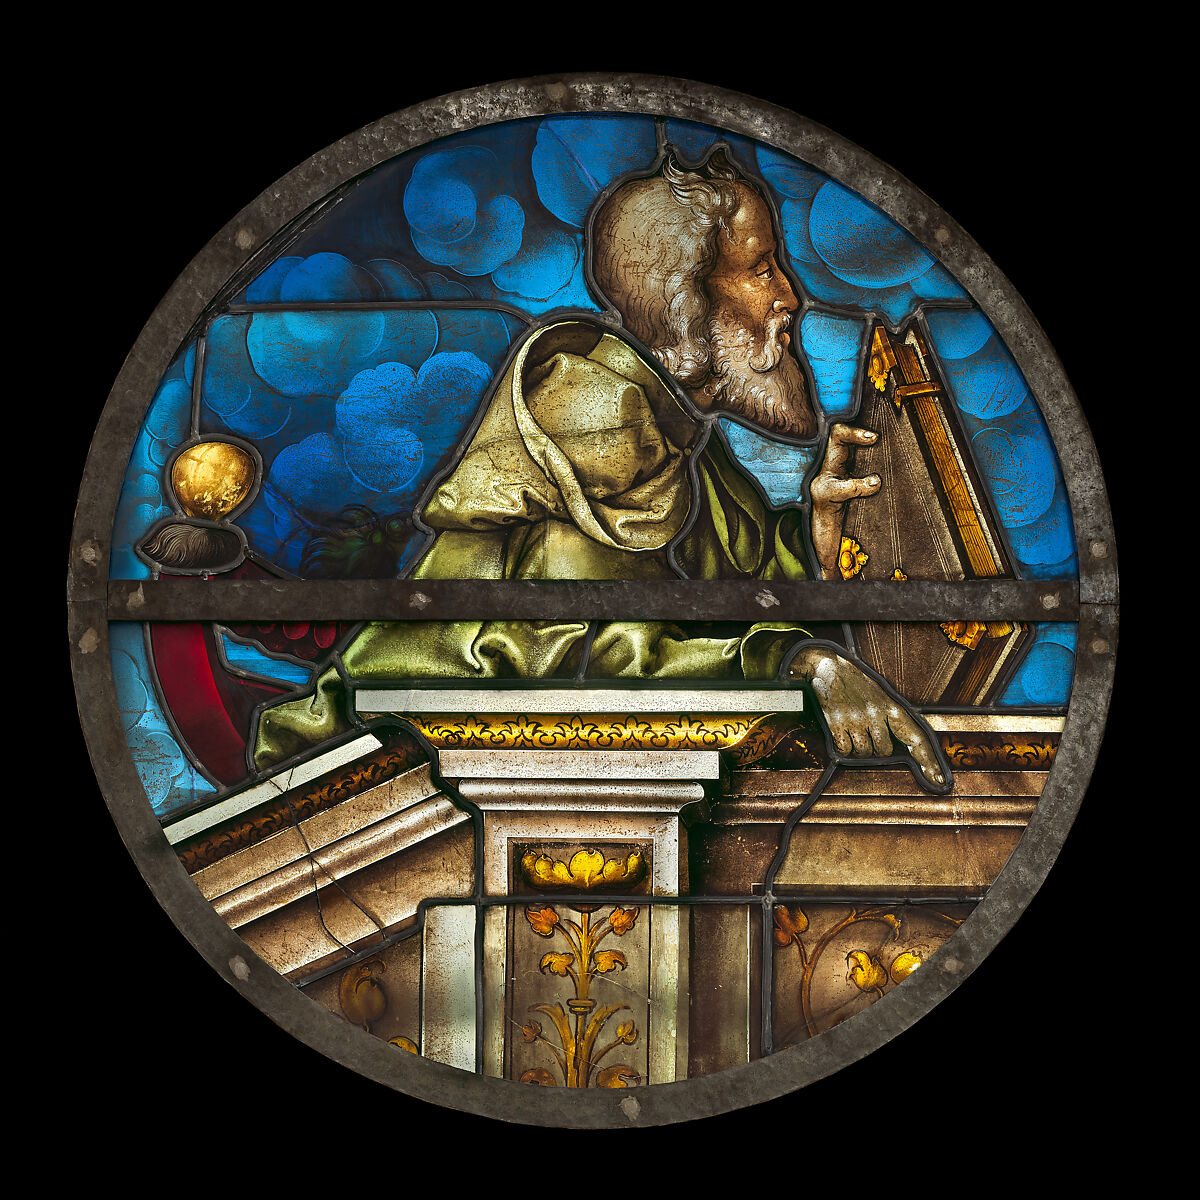 The Prophet Moses, Valentin Bousch (French, active 1514–41, died 1541), Stained glass, French, Lorraine, Metz 